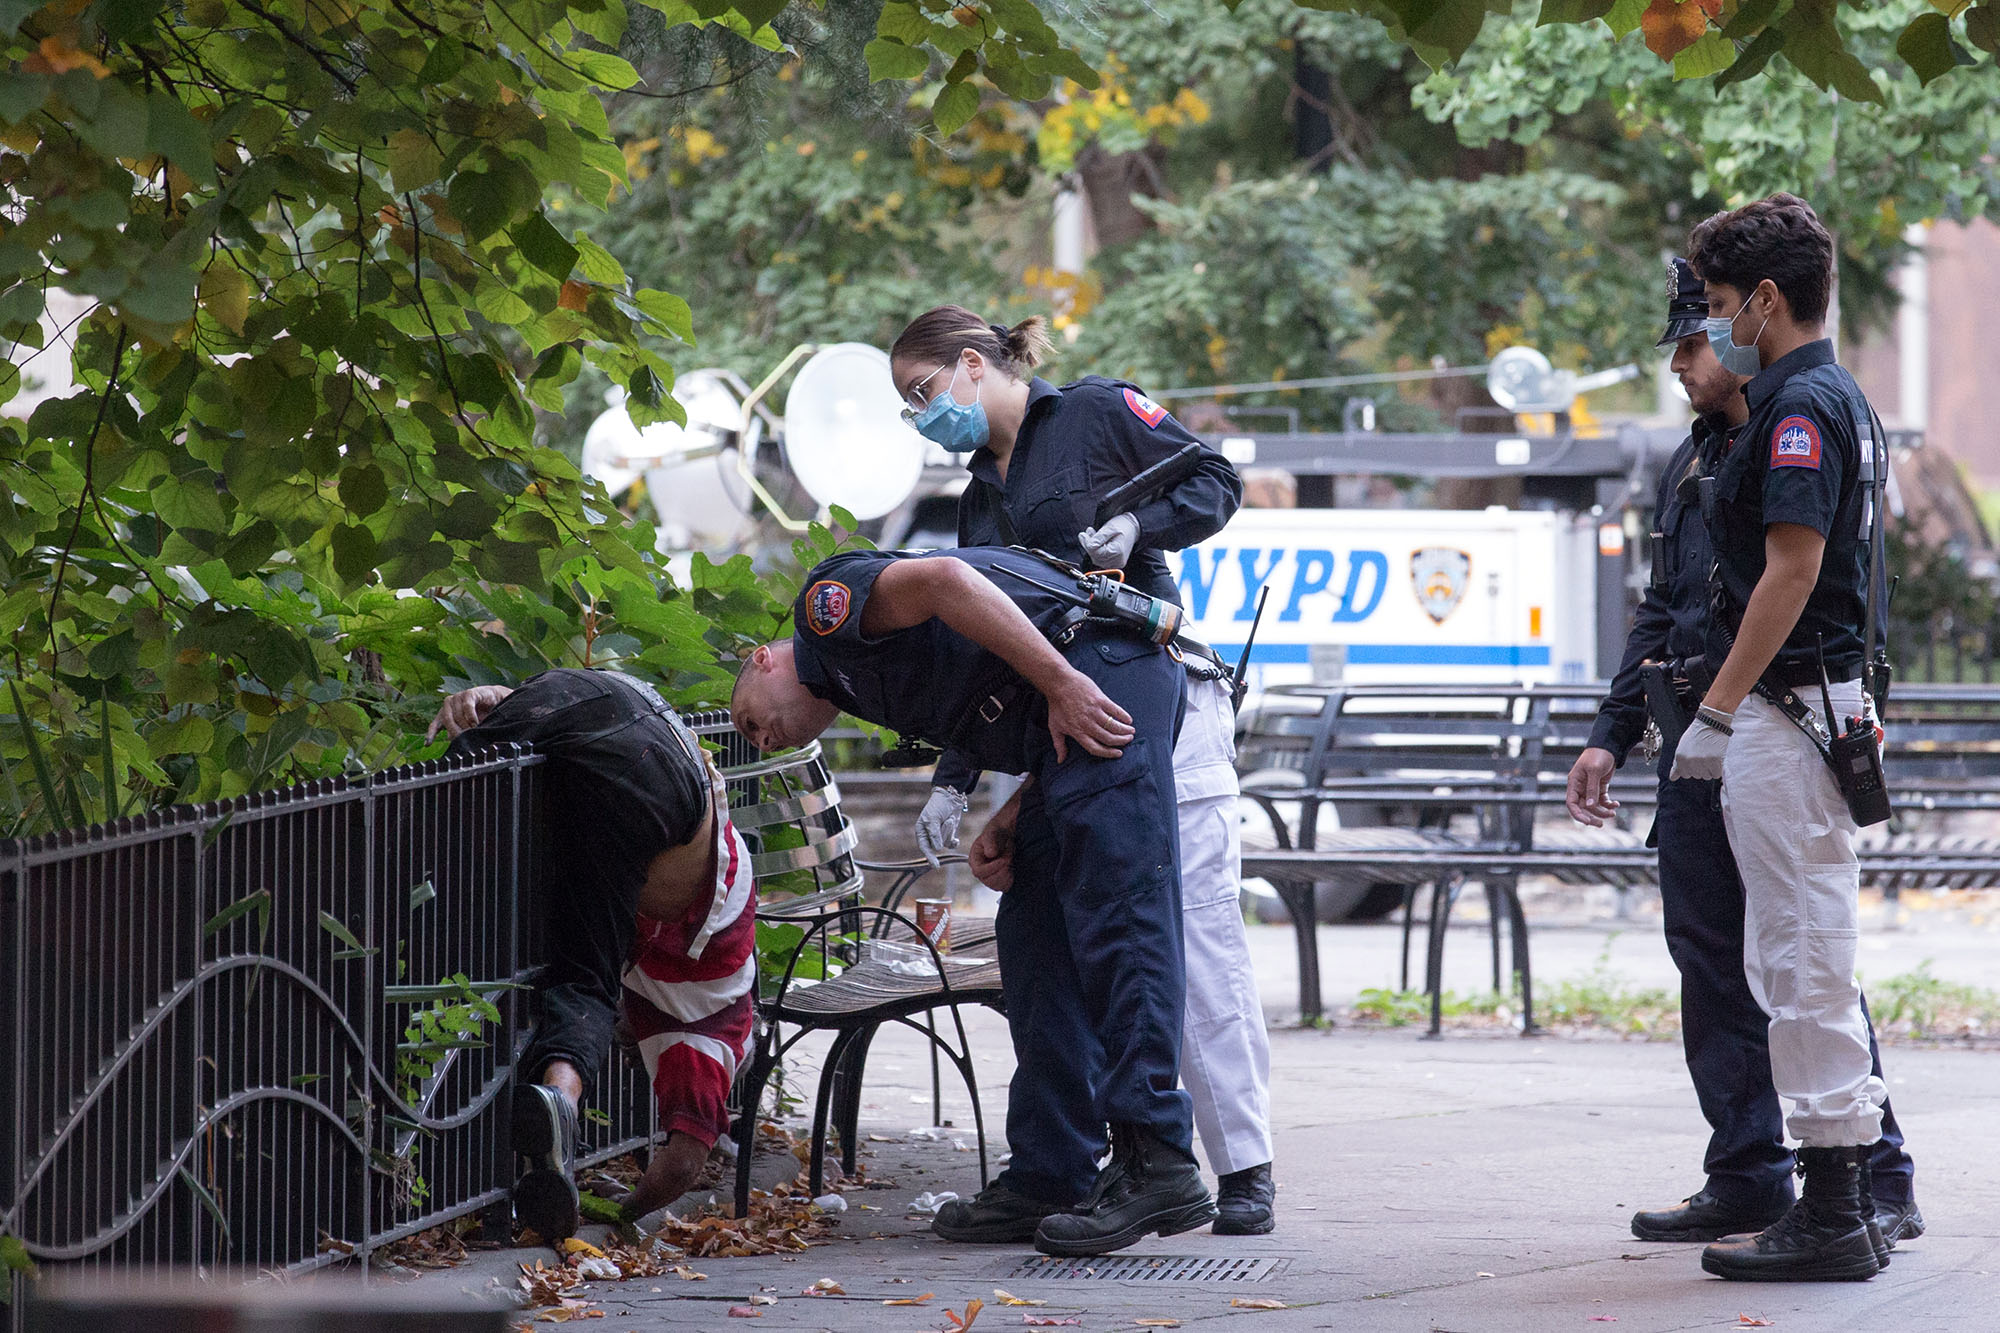 Surrender in the war on drugs: Body found outside NYPD HQ likely OD’d